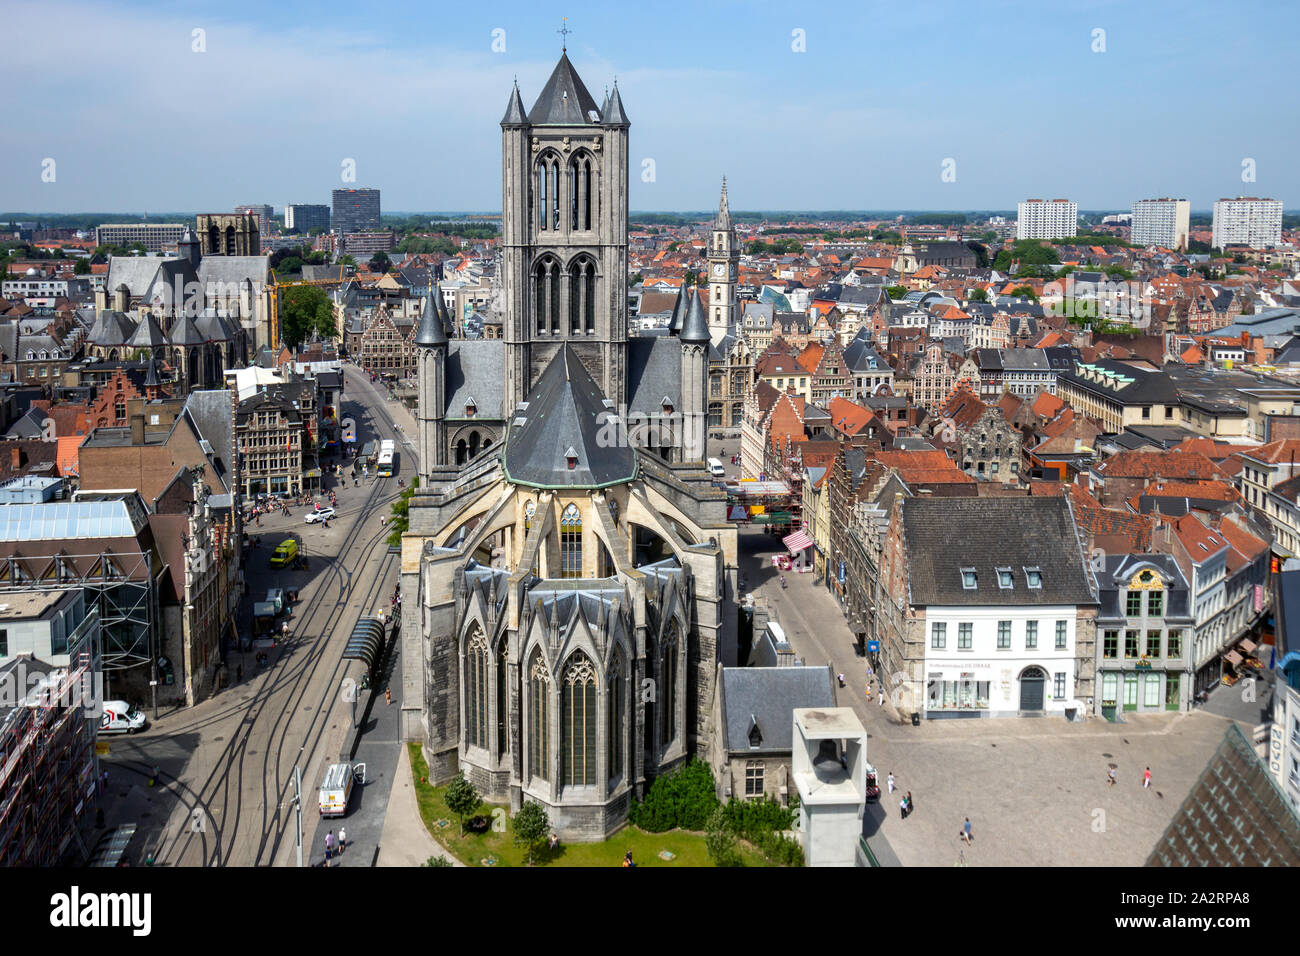 GHENT - JUN 18, 2013: View on the St Bavos Cathedral of Gent. The city is a municipality located in the Flemish region of Belgium. Stock Photo